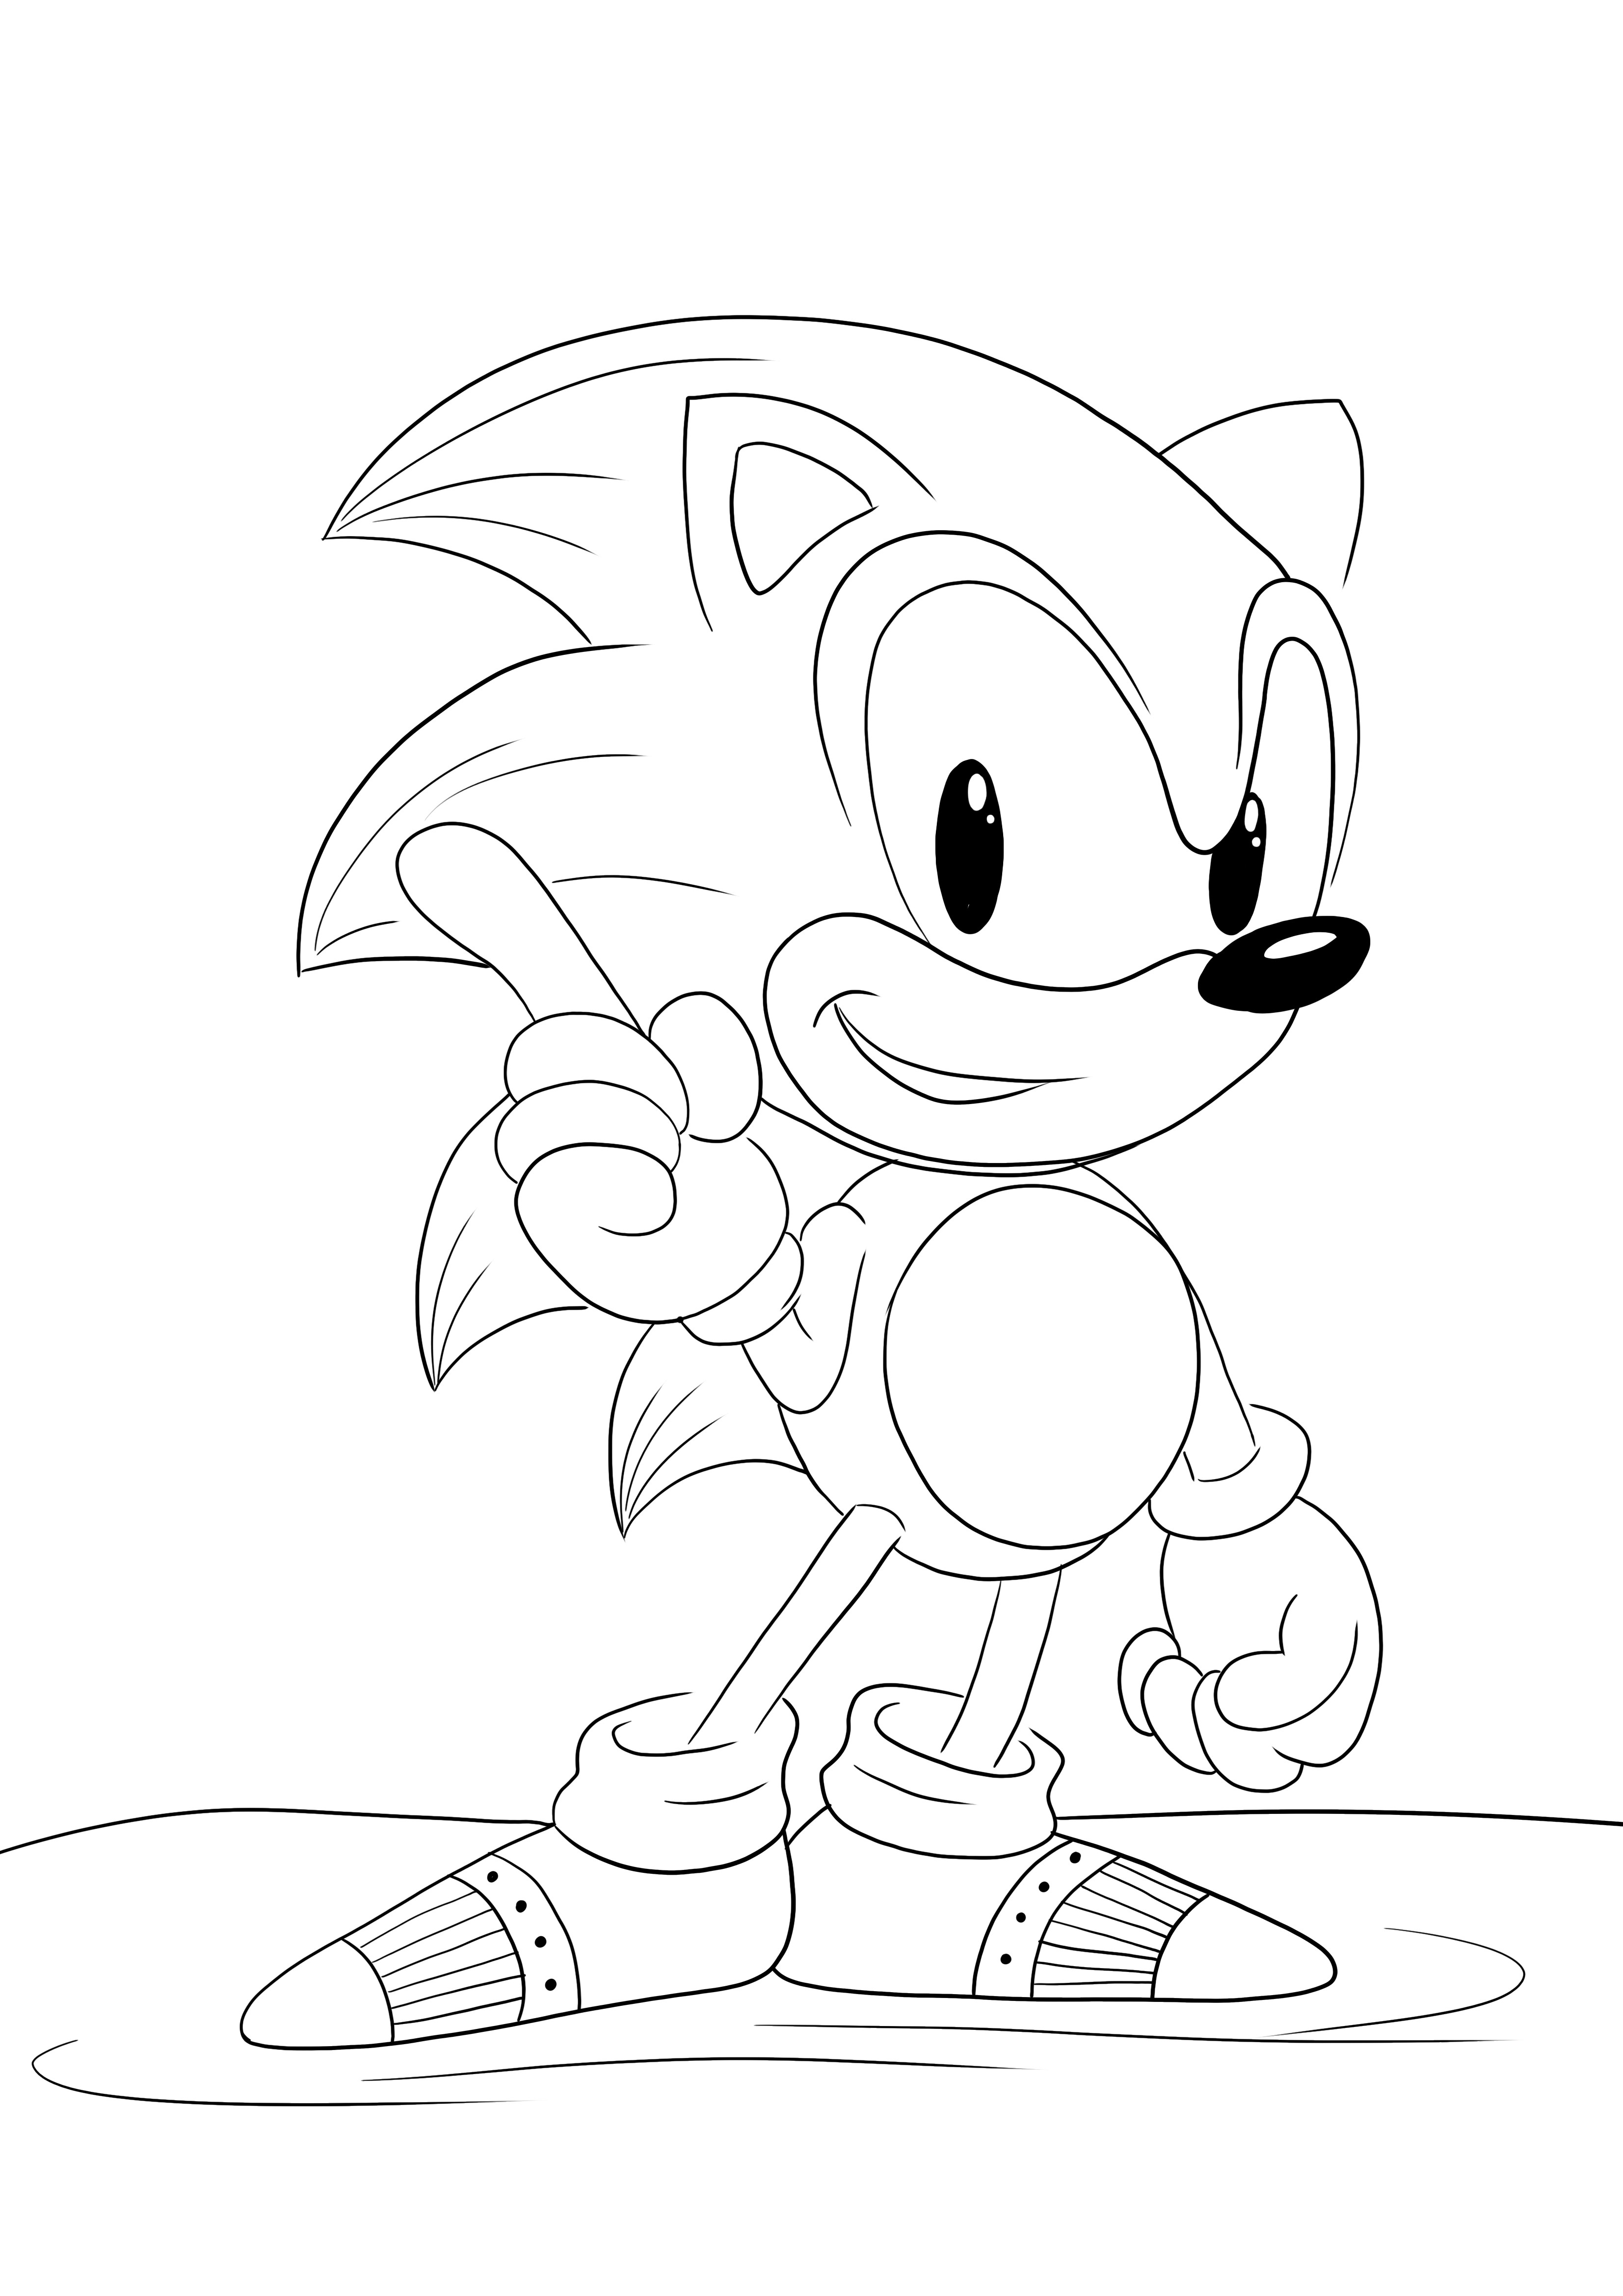 Sonic and his finger raised to pay attention free printable